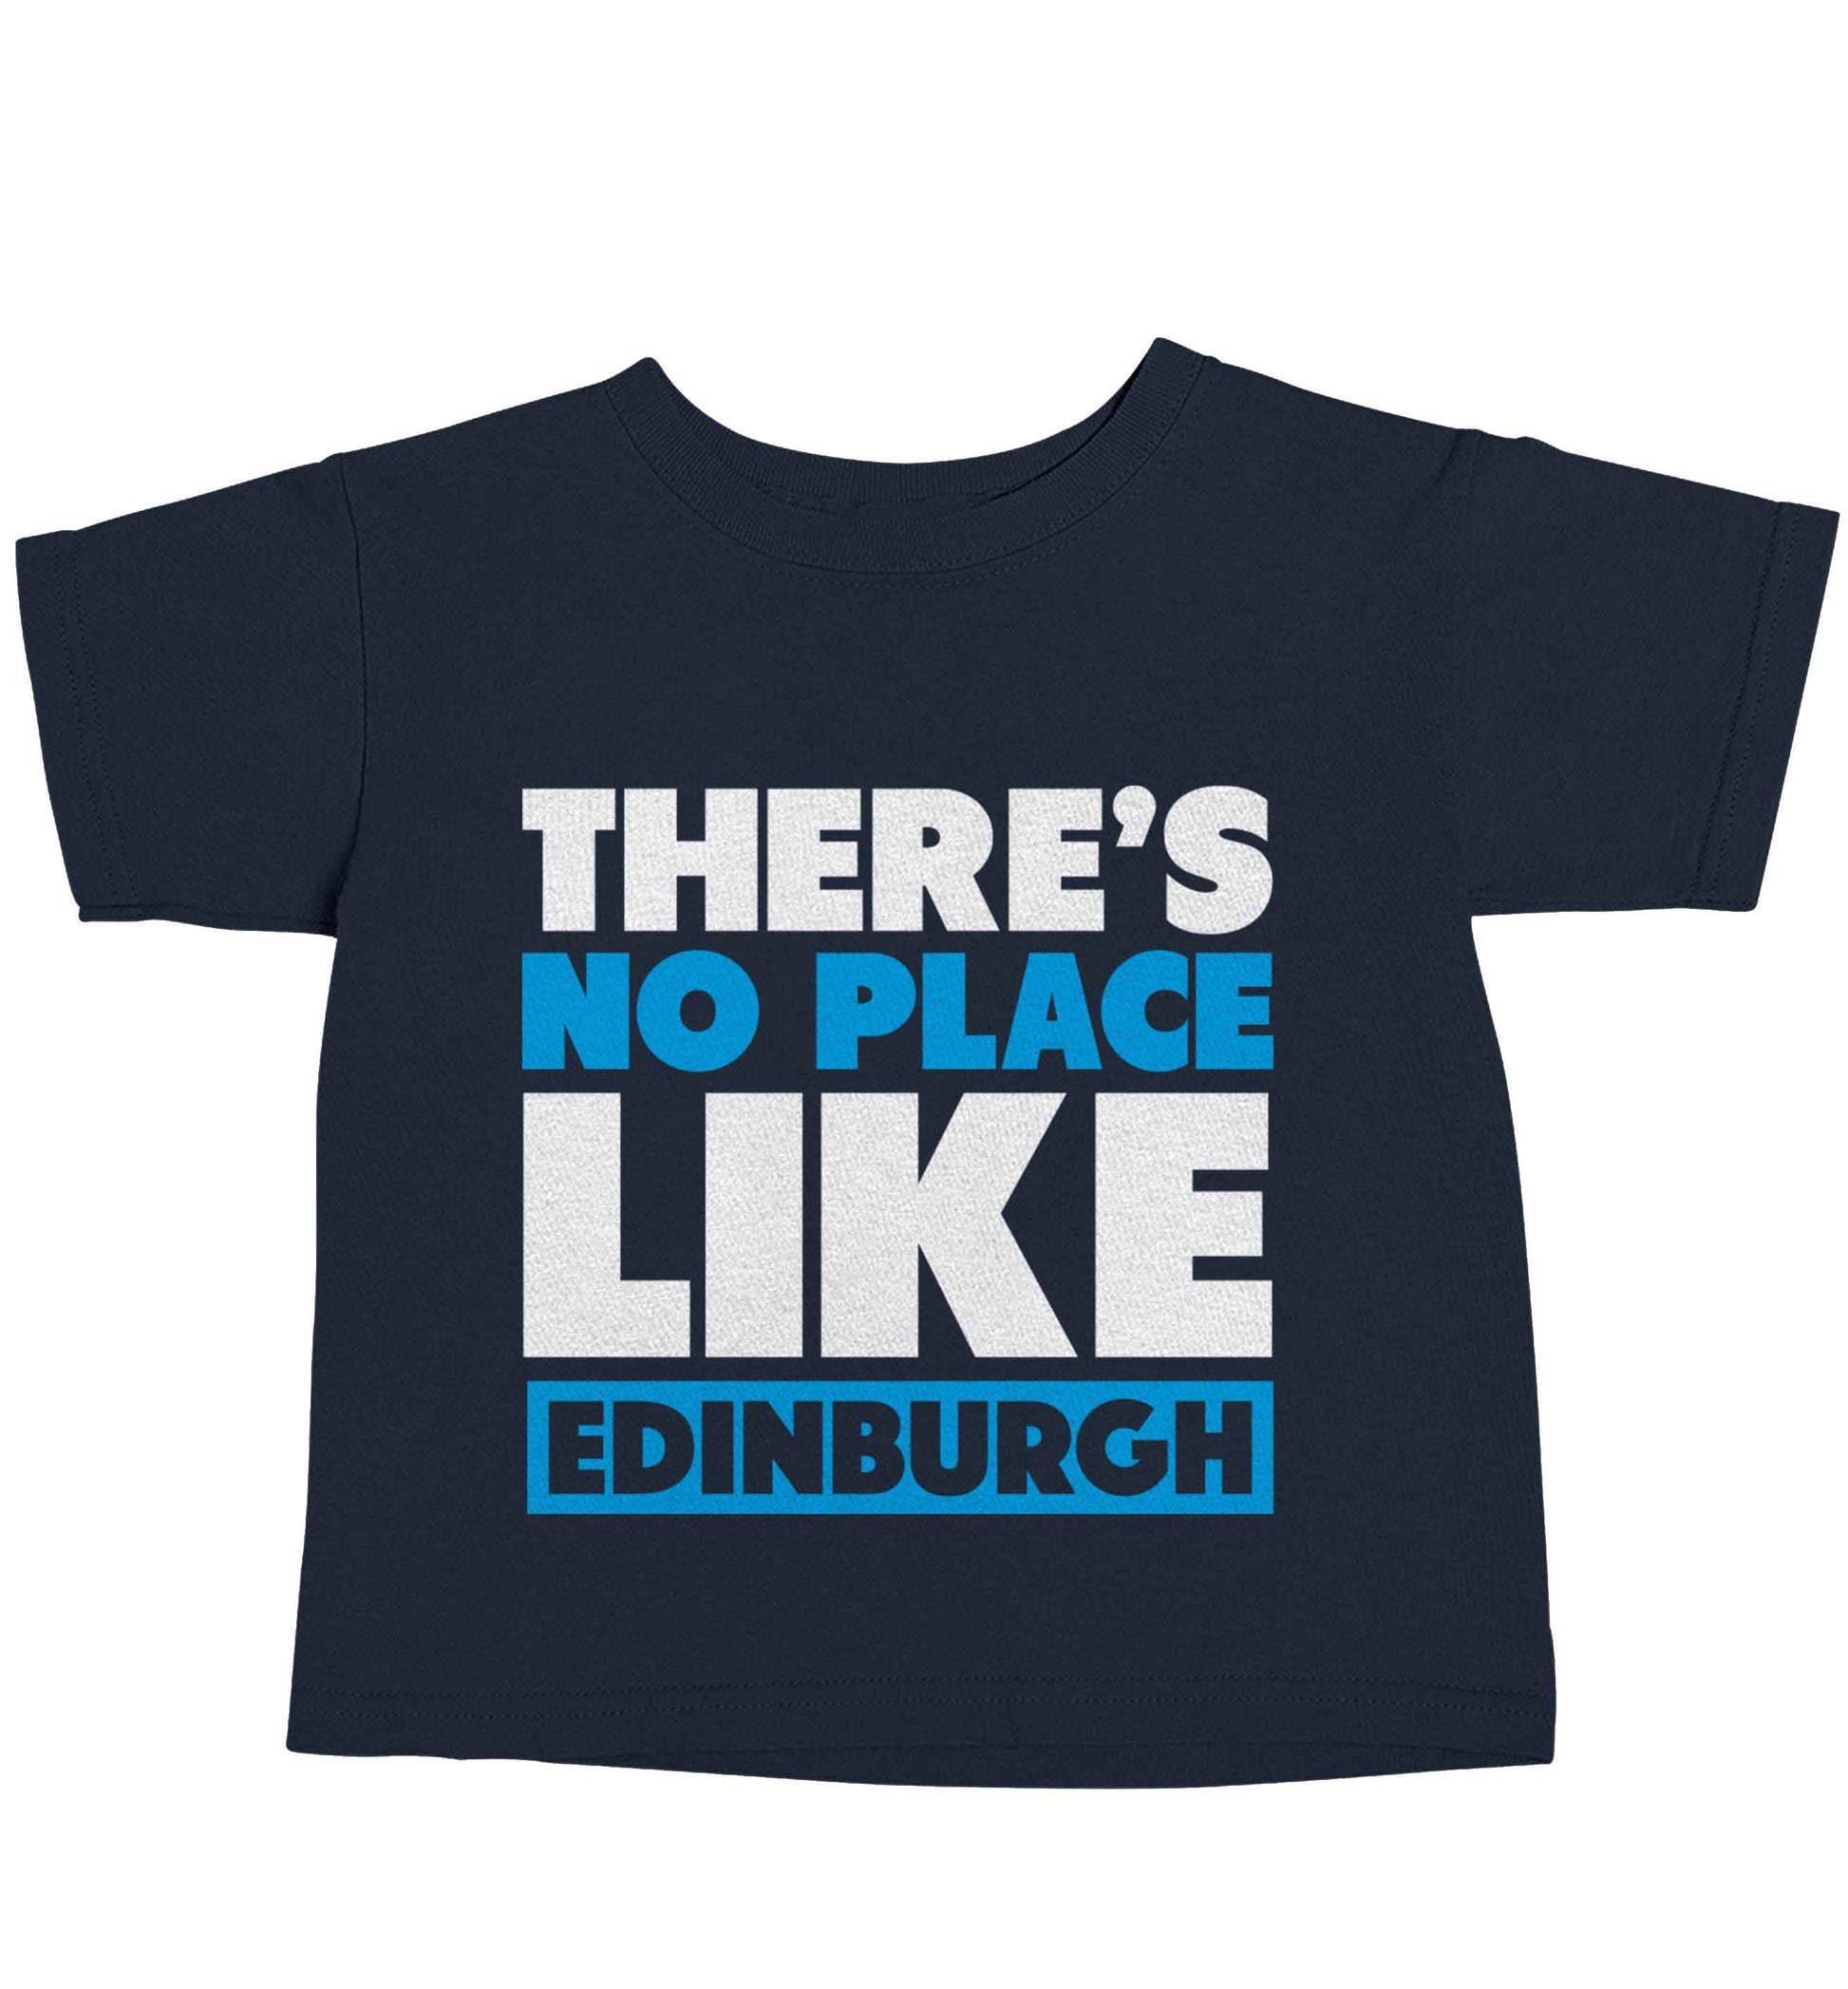 There's no place like Edinburgh navy baby toddler Tshirt 2 Years